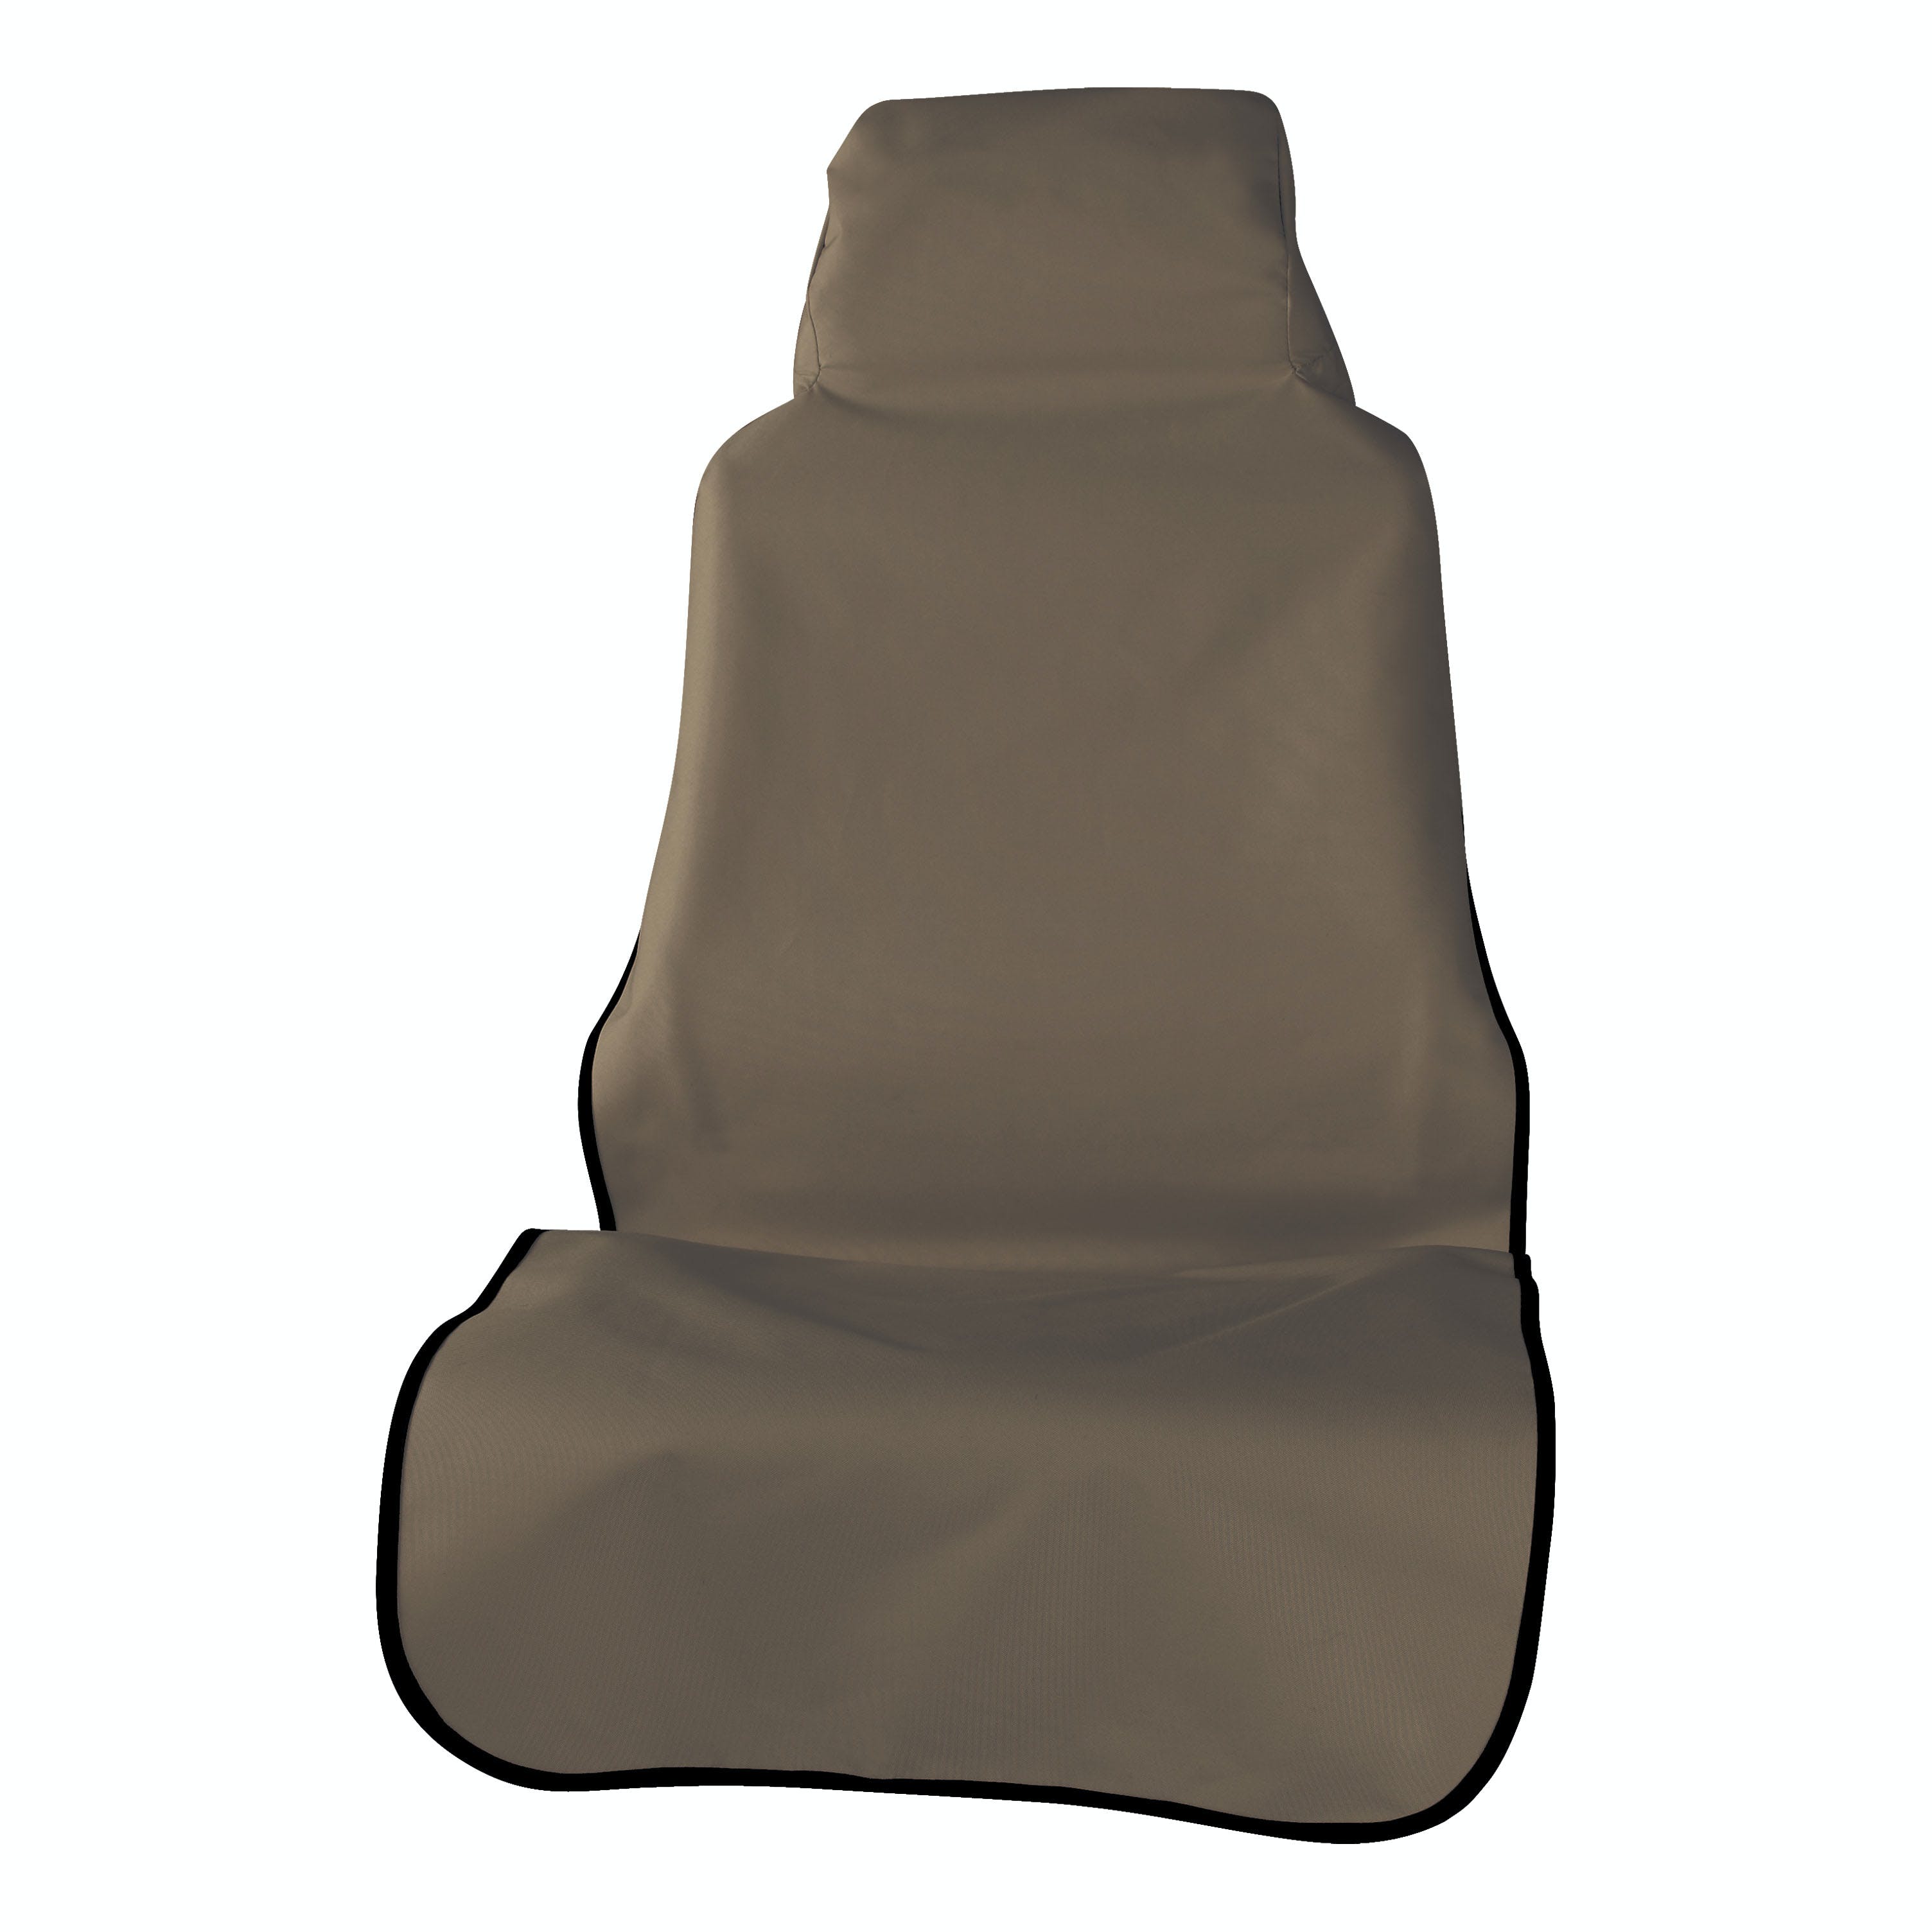 CURT 18502 Seat Defender 58 x 23 Removable Waterproof Brown Bucket Seat Cover